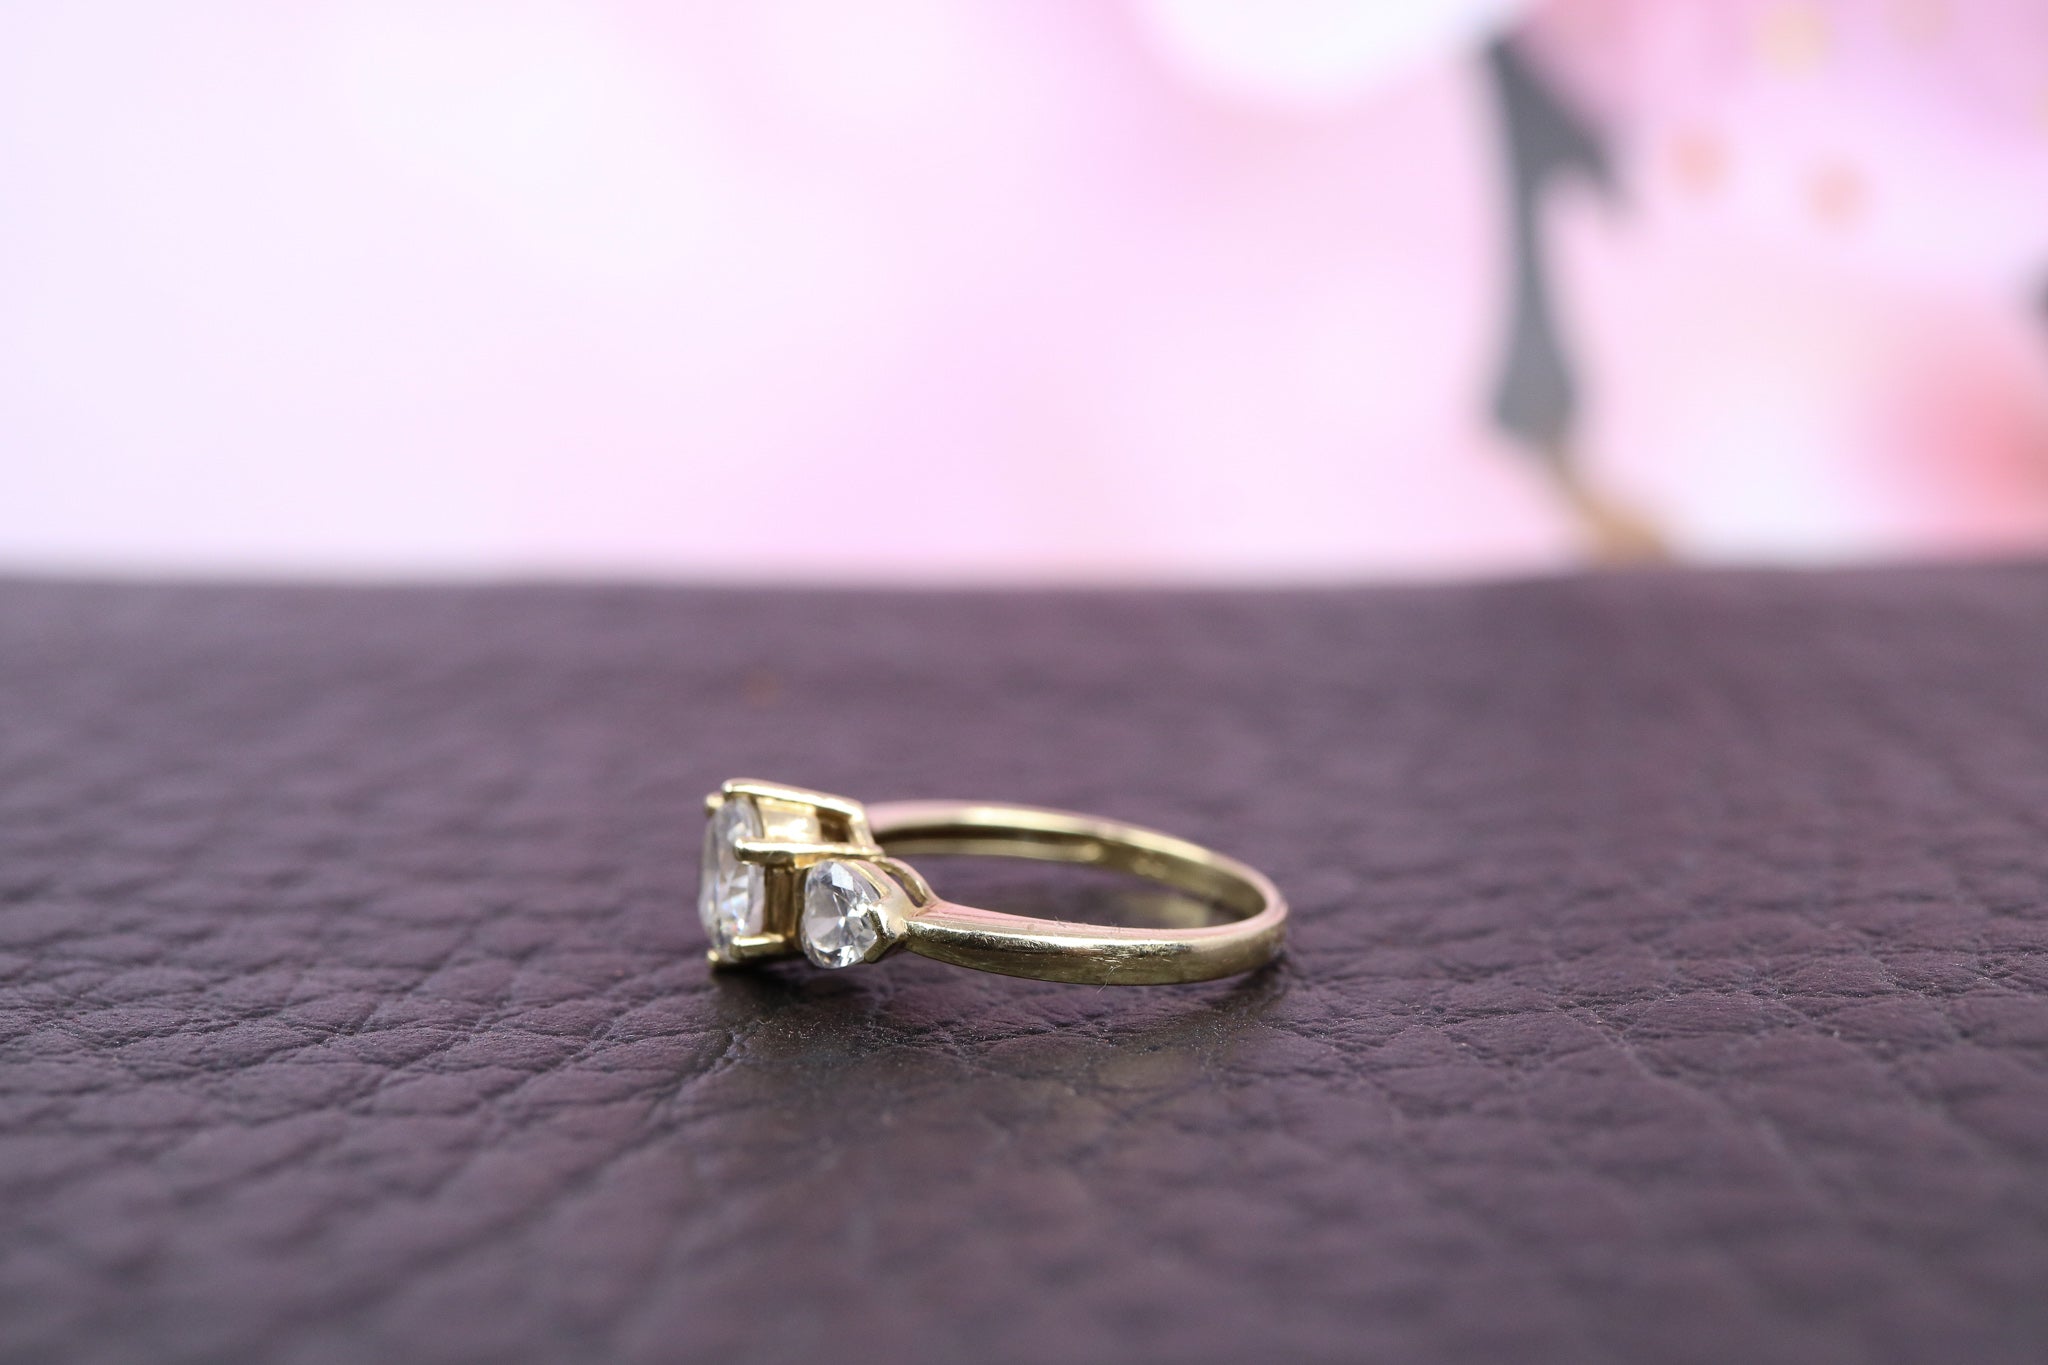 9ct Yellow Gold & Cubic Zirconia Ring - HJ2456 - Hallmark Jewellers Formby & The Jewellers Bench Widnes